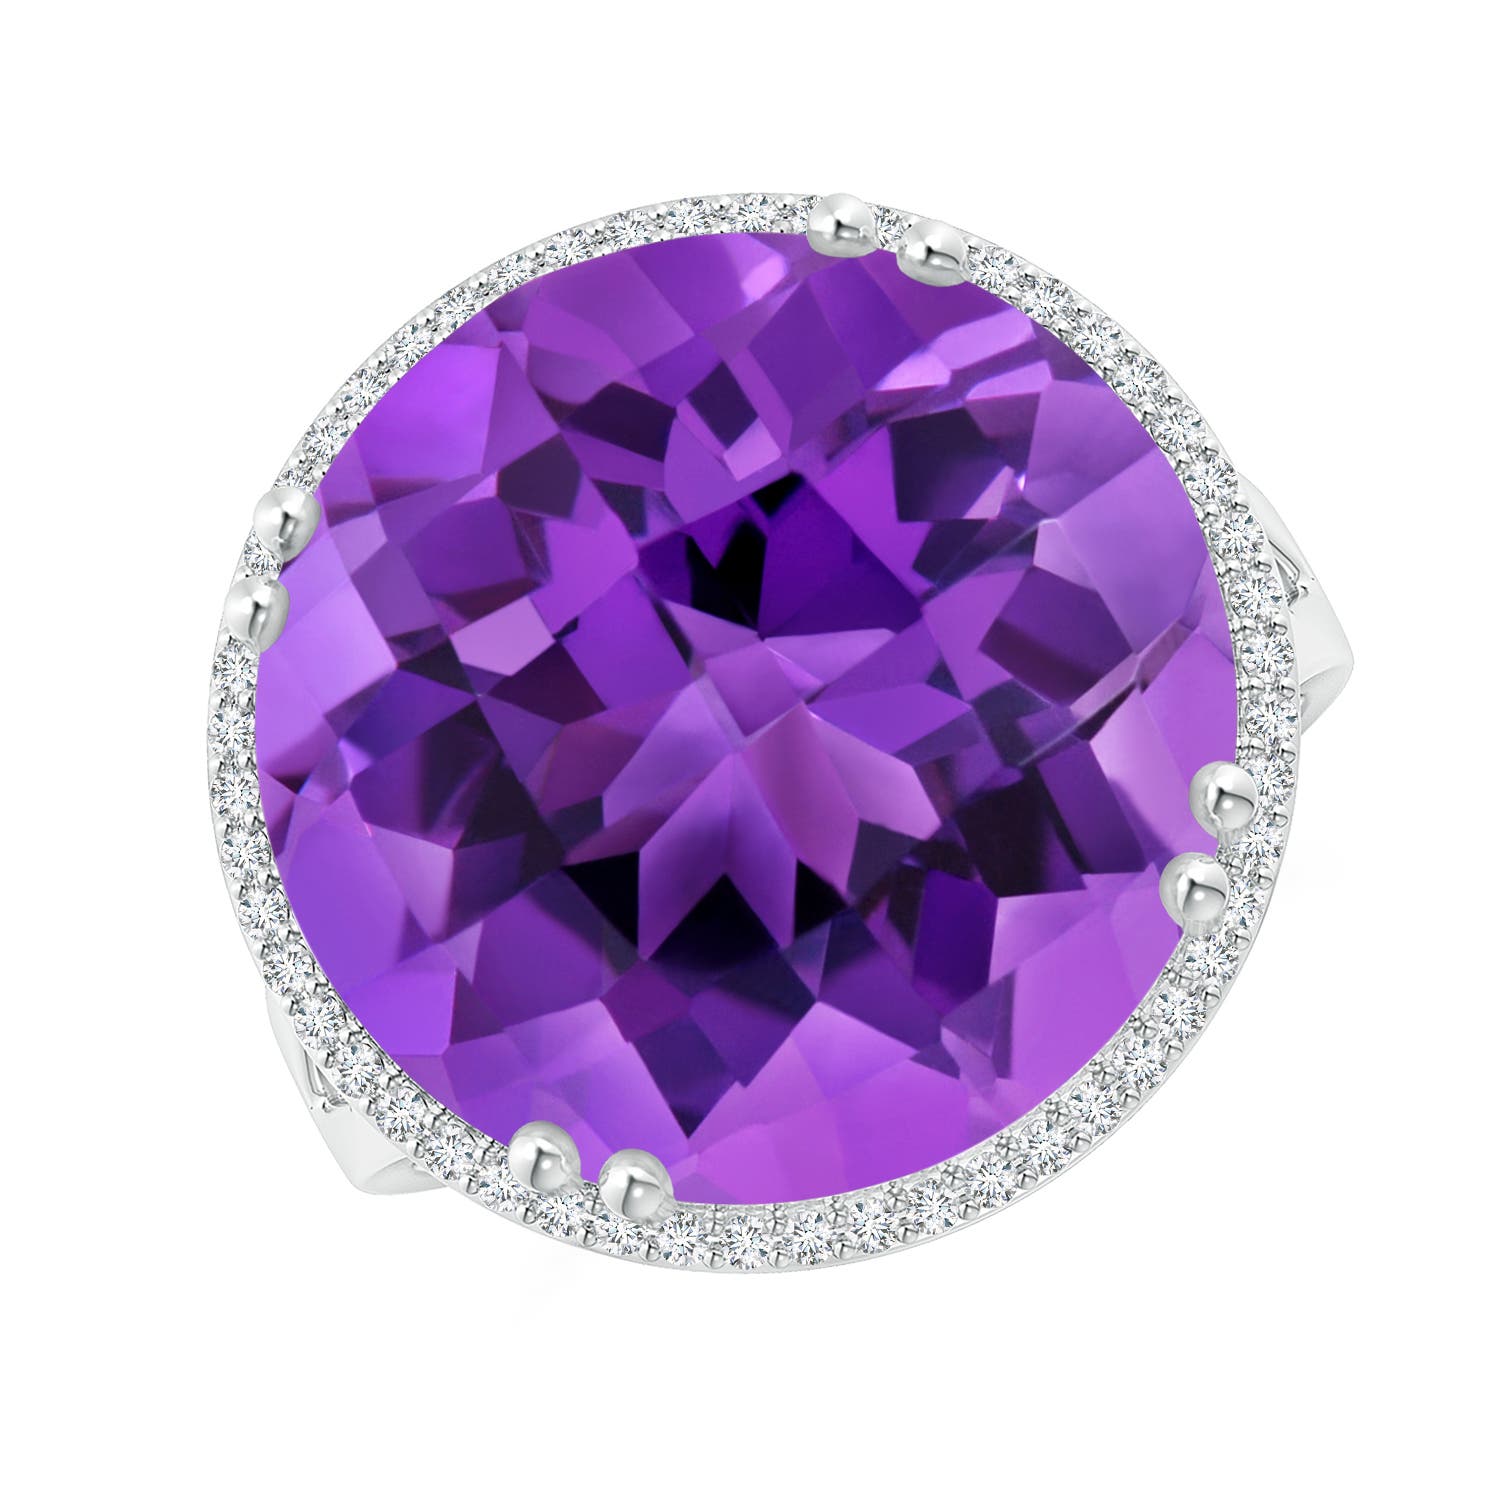 AAA - Amethyst / 15.18 CT / 14 KT White Gold